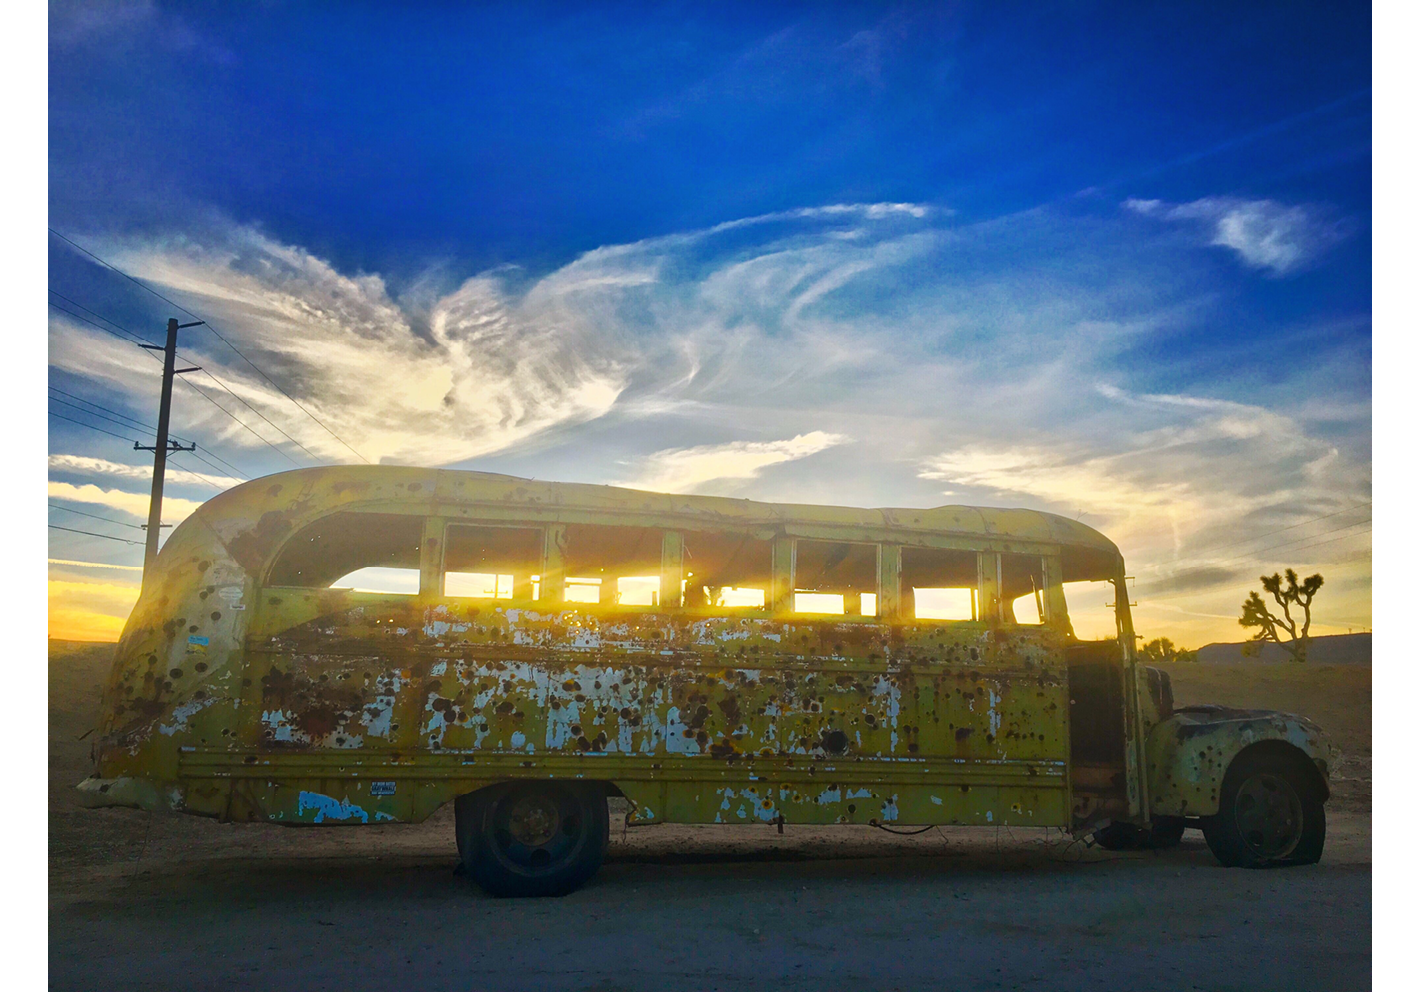 An old, abandoned yellow school bus with a cloud above.